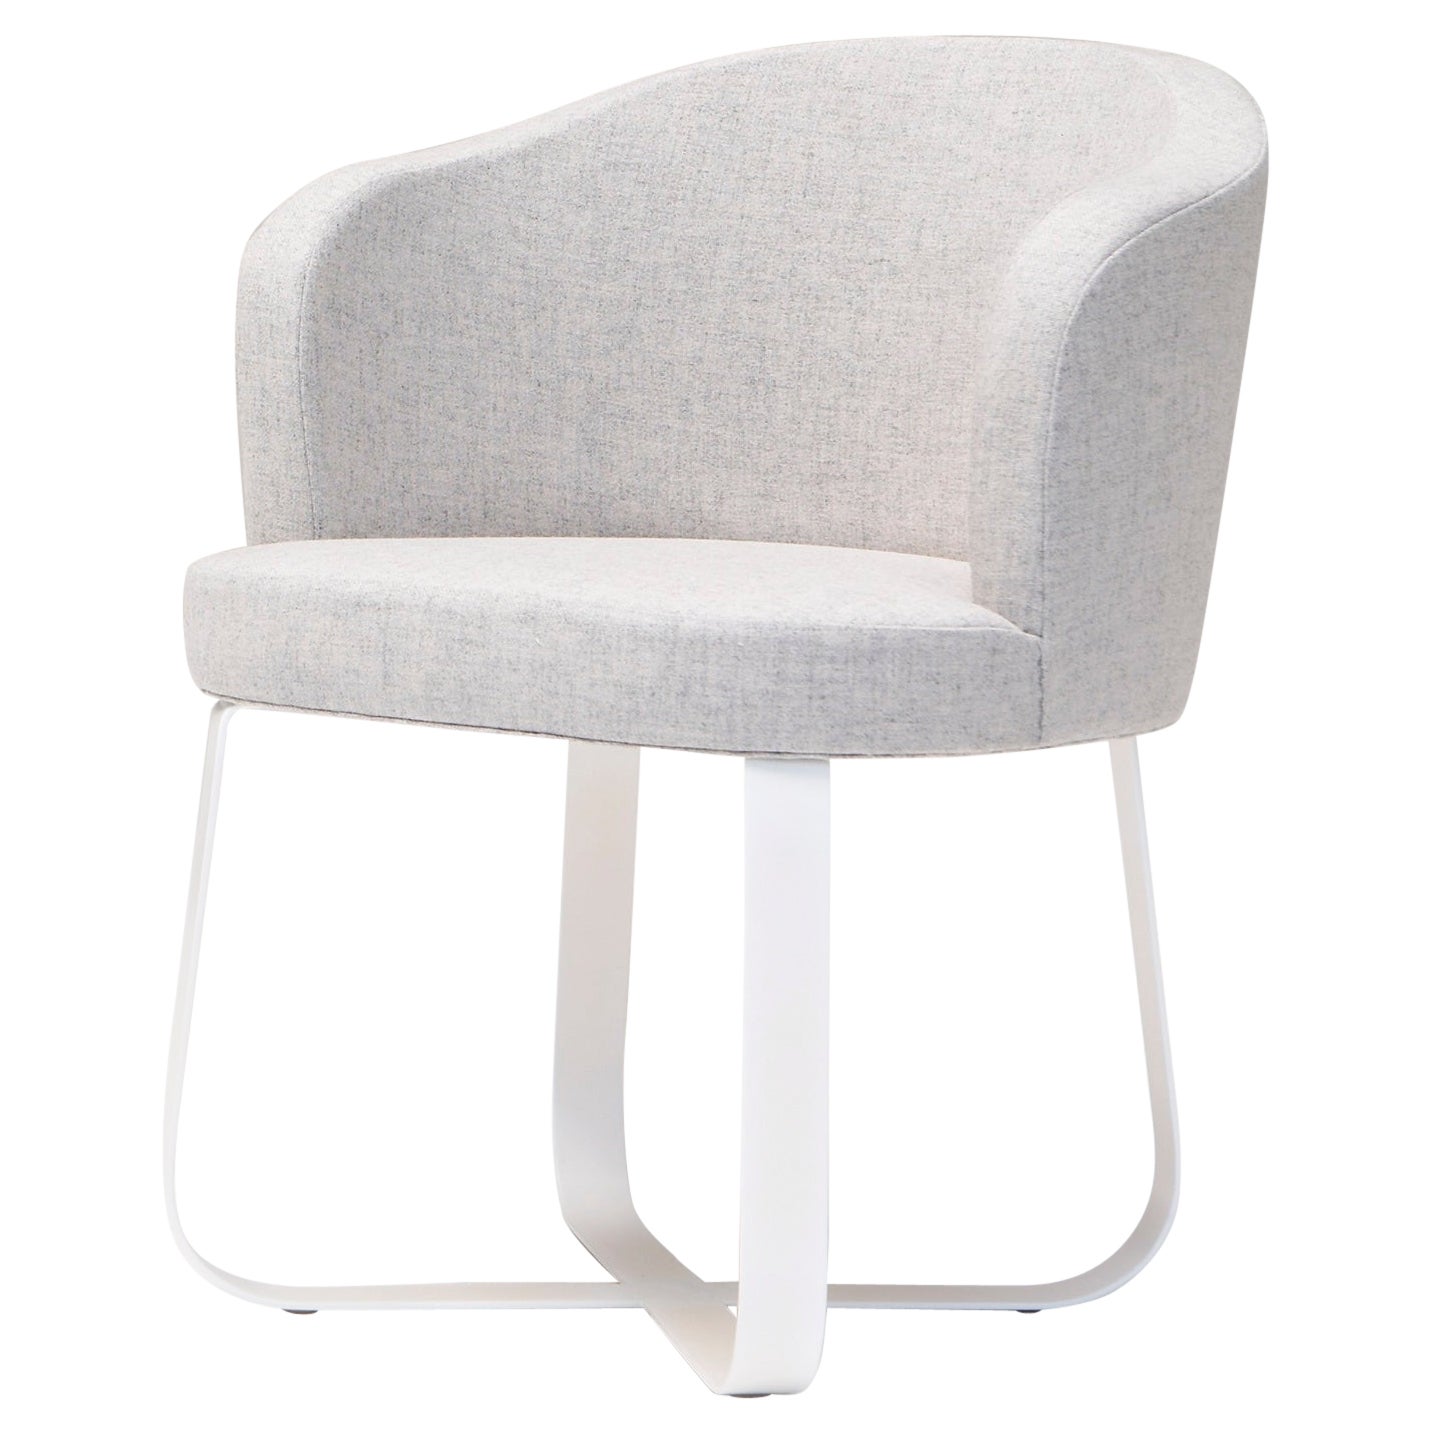 Primi Personal Chair by Phase Design For Sale